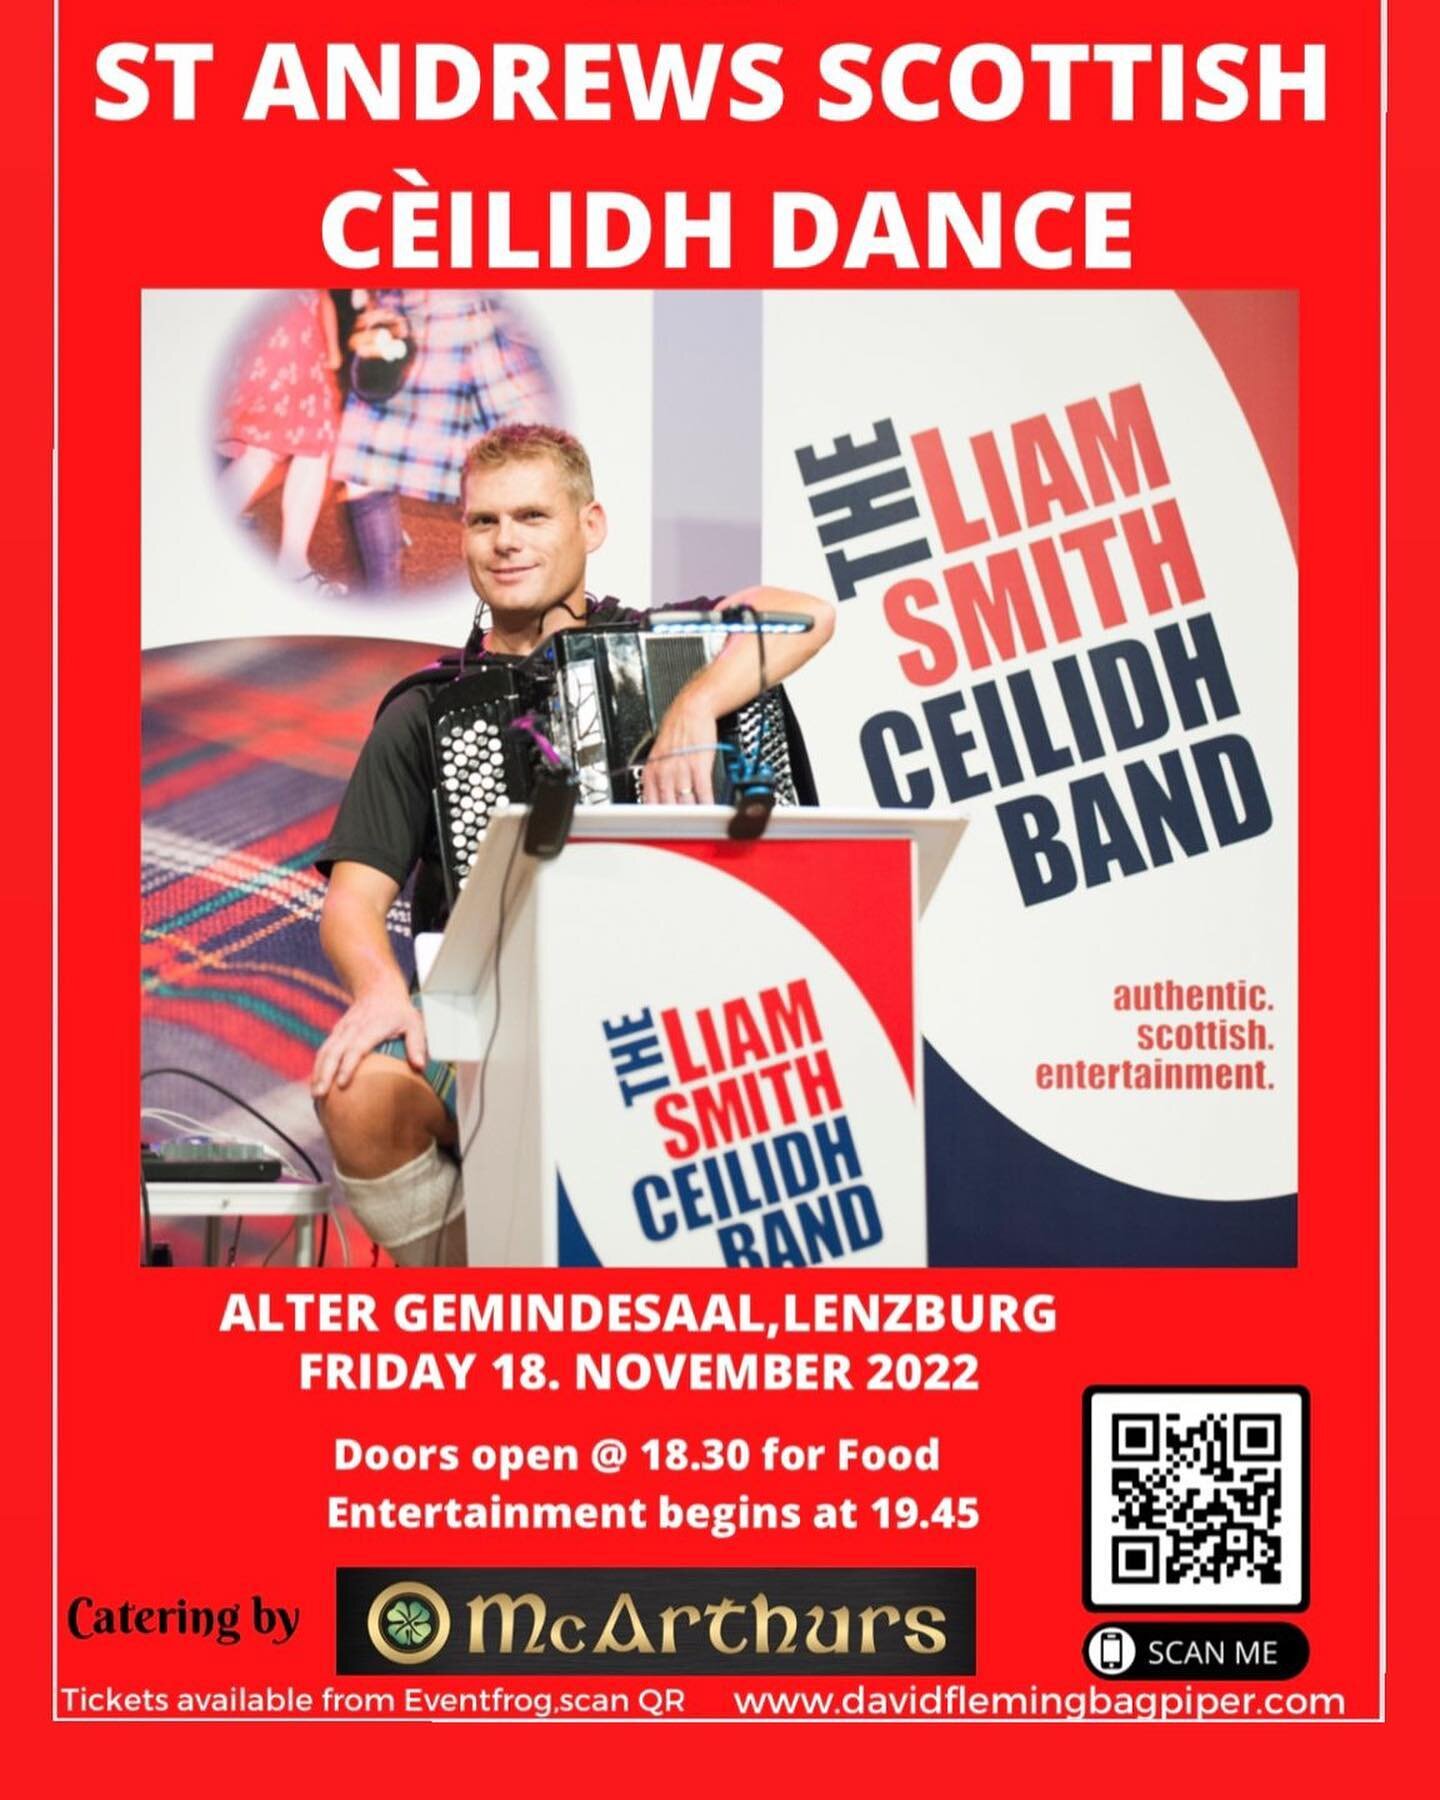 I do miss a good ceilidh 🏴󠁧󠁢󠁳󠁣󠁴󠁿 Our Highland Events Team is looking forward to perform at a Ceilidh on Swiss soil. On Friday 18th November we will display traditional Scottish Highland Dance at The St Andrews Ceilidh in Lenzburg. 

For more i